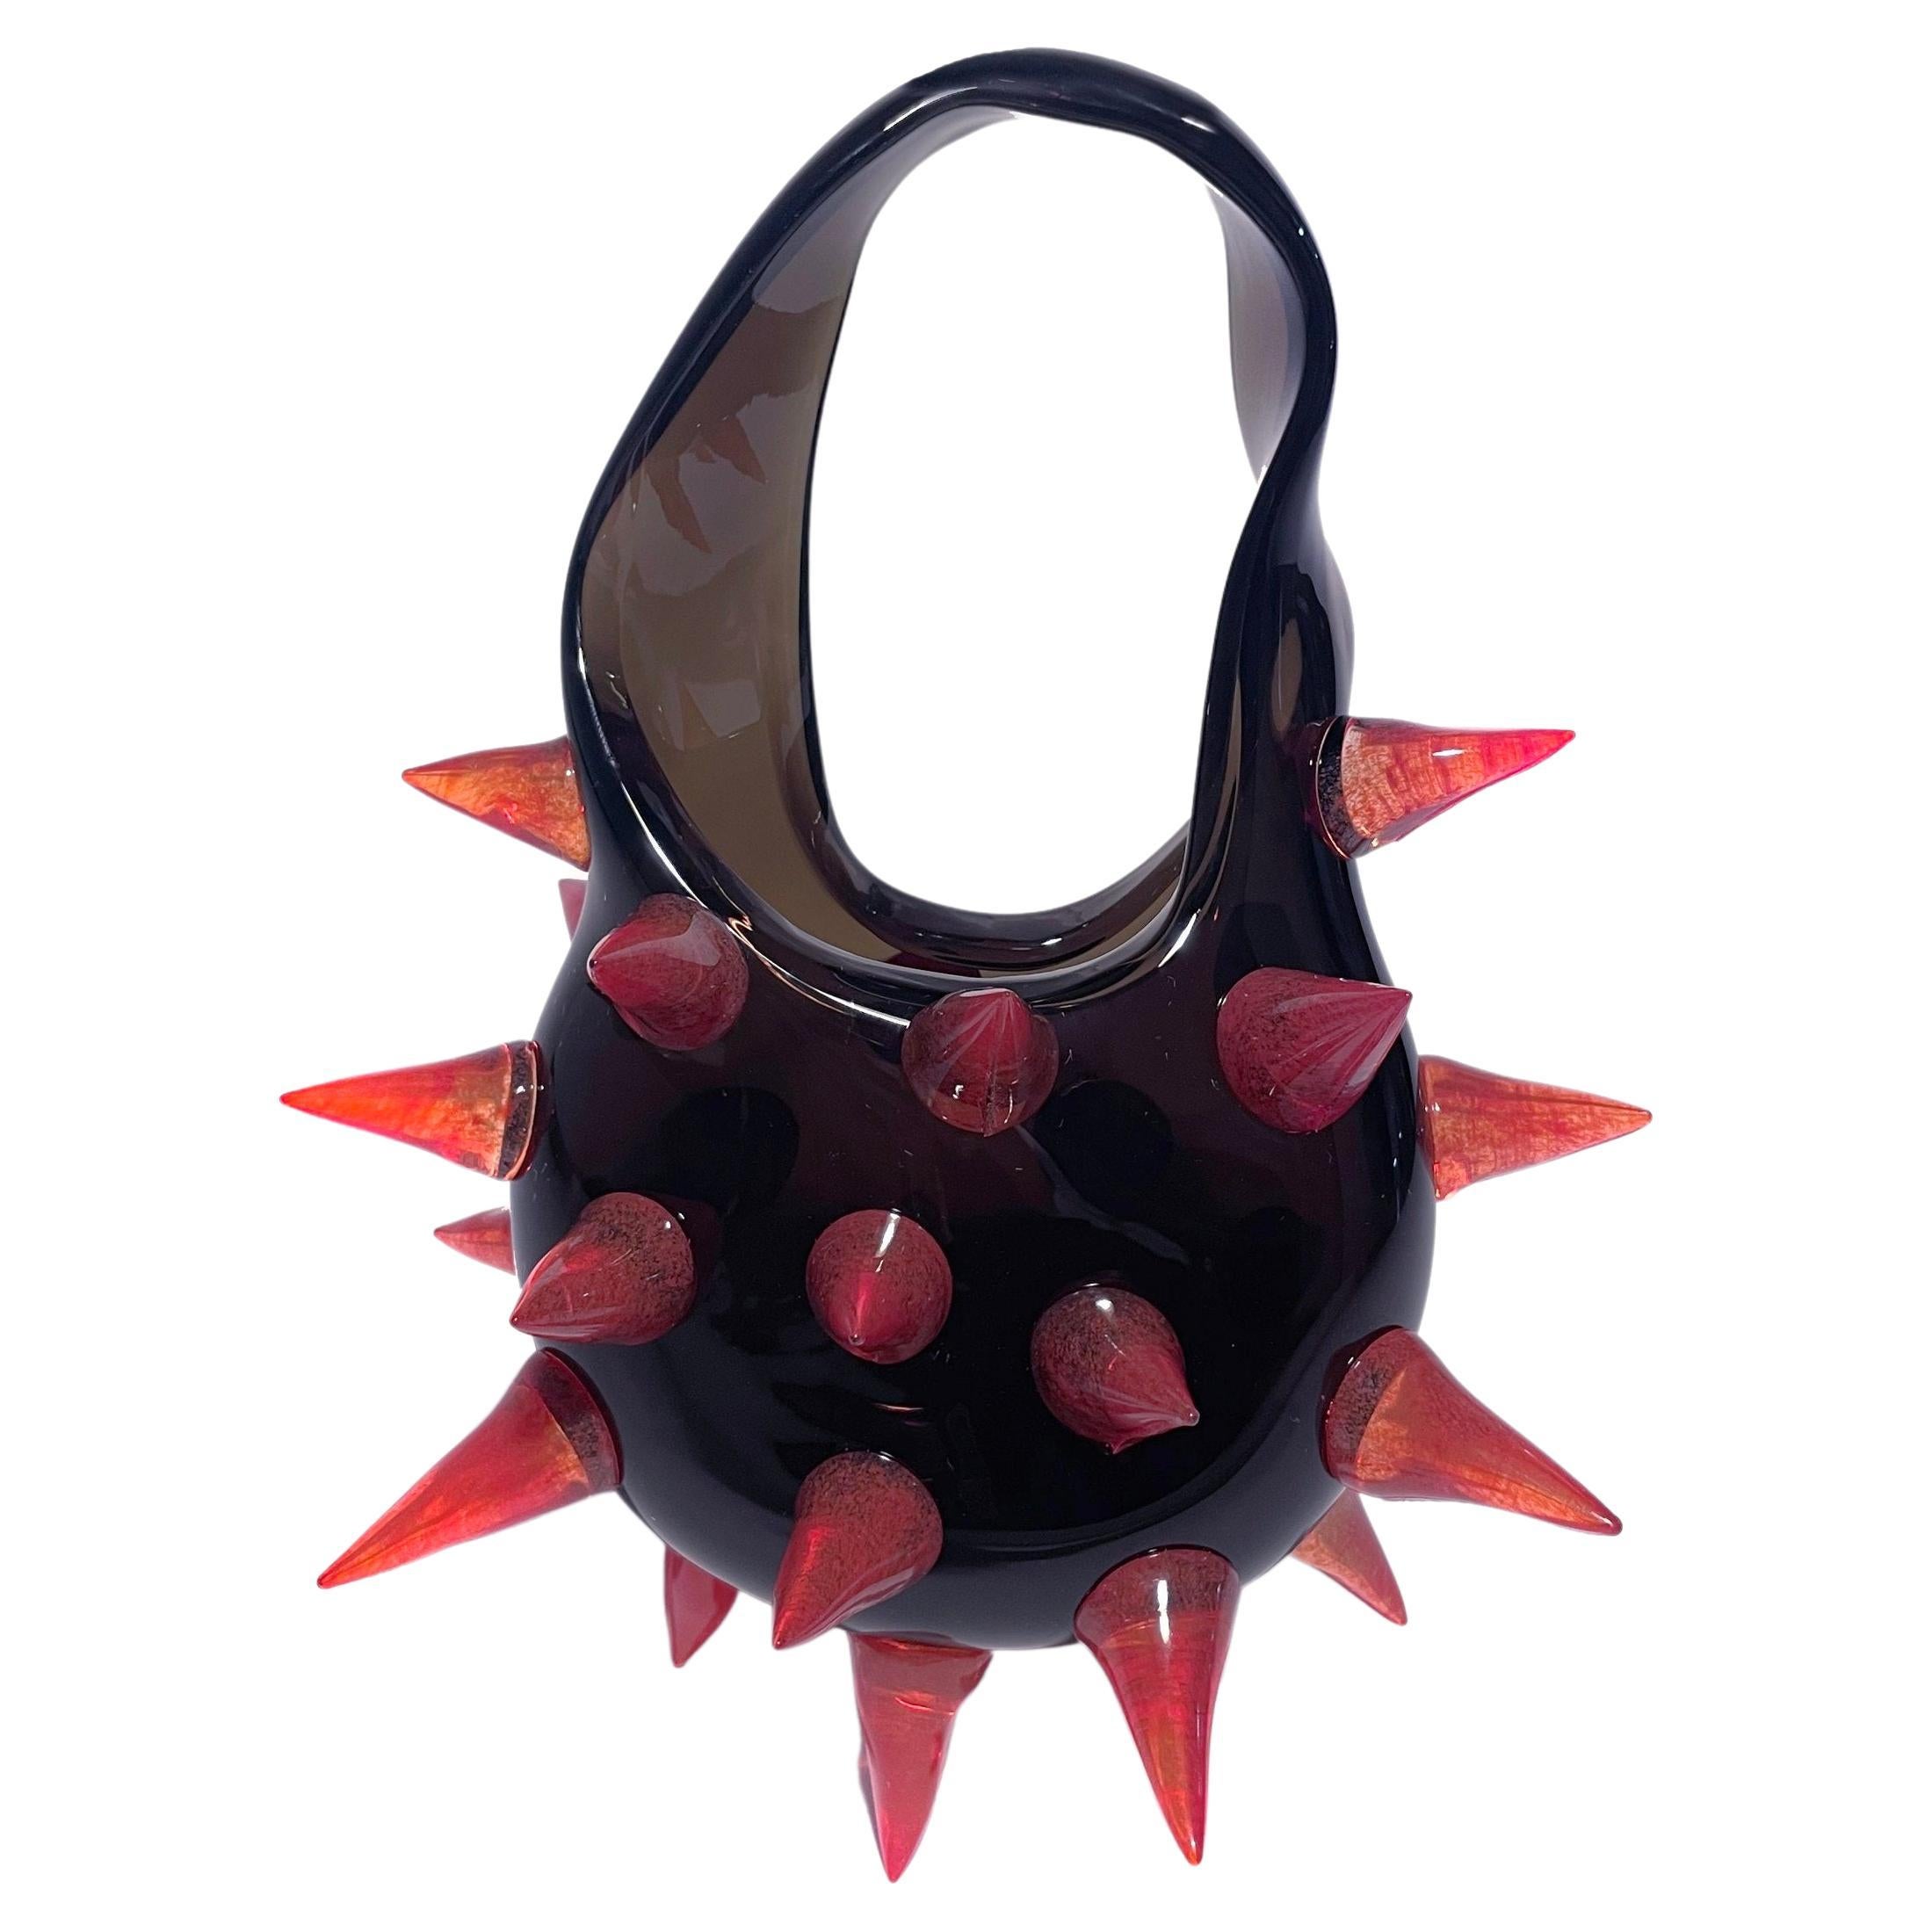 Dark, grey, green bag with semi-sharp red spikes. If I'm being honest, this is the direction I'd like to take this bag project. I want to make them more sculptural, more expressive, more avant-garde. I don't need to appeal to the masses. I'd rather